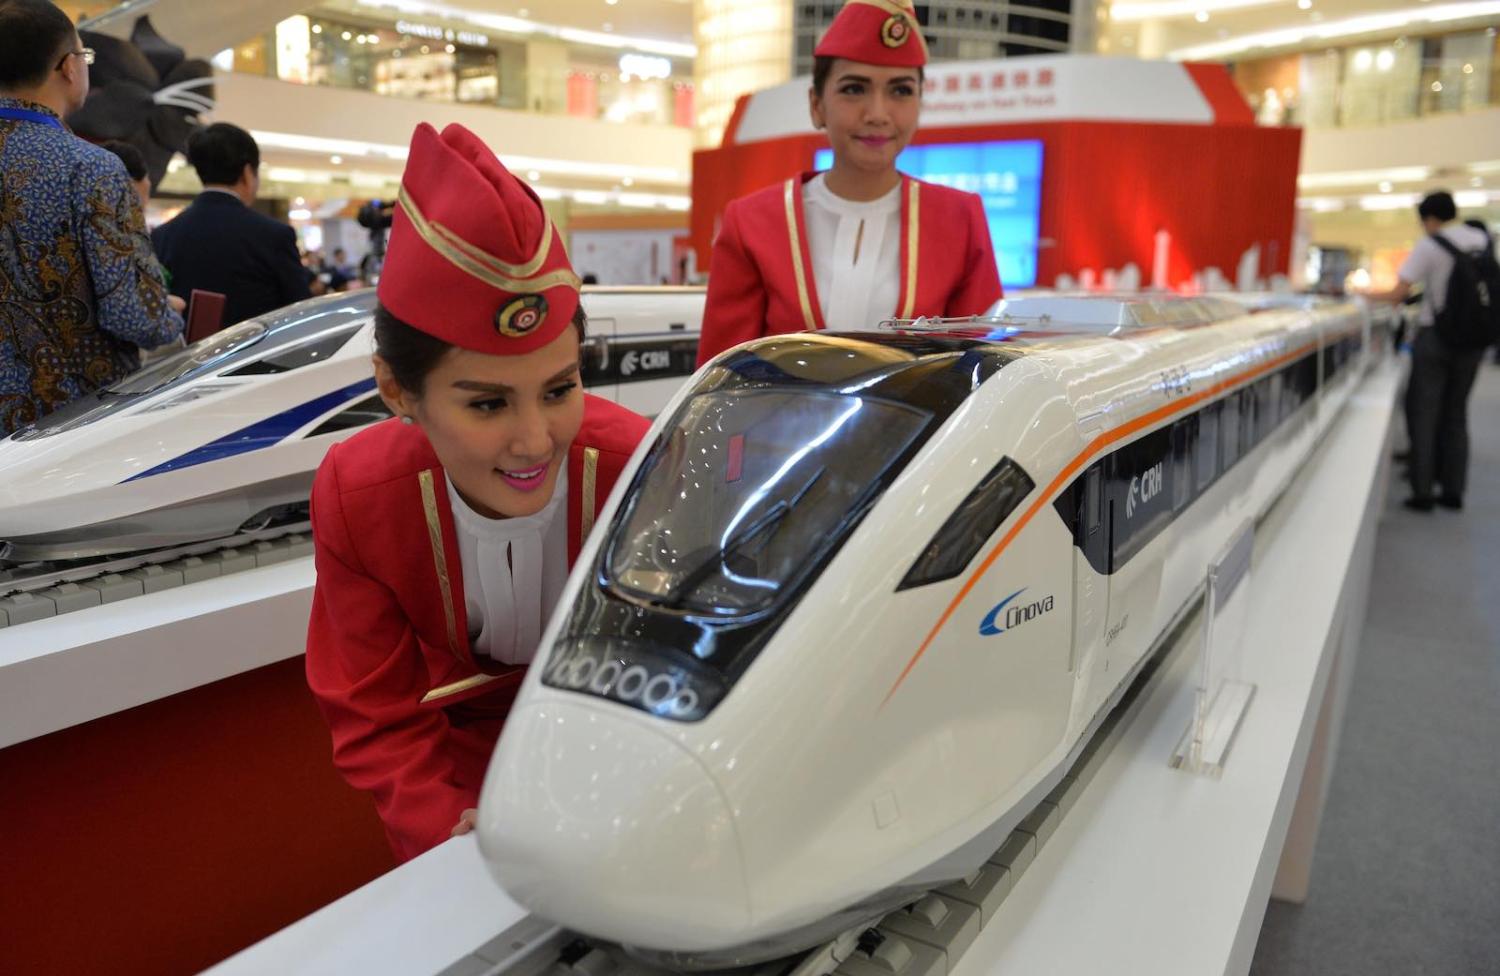 Models of Chinese-made bullet trains on exhibition in Jakarta (Photo: Bay Ismoyo via Getty)